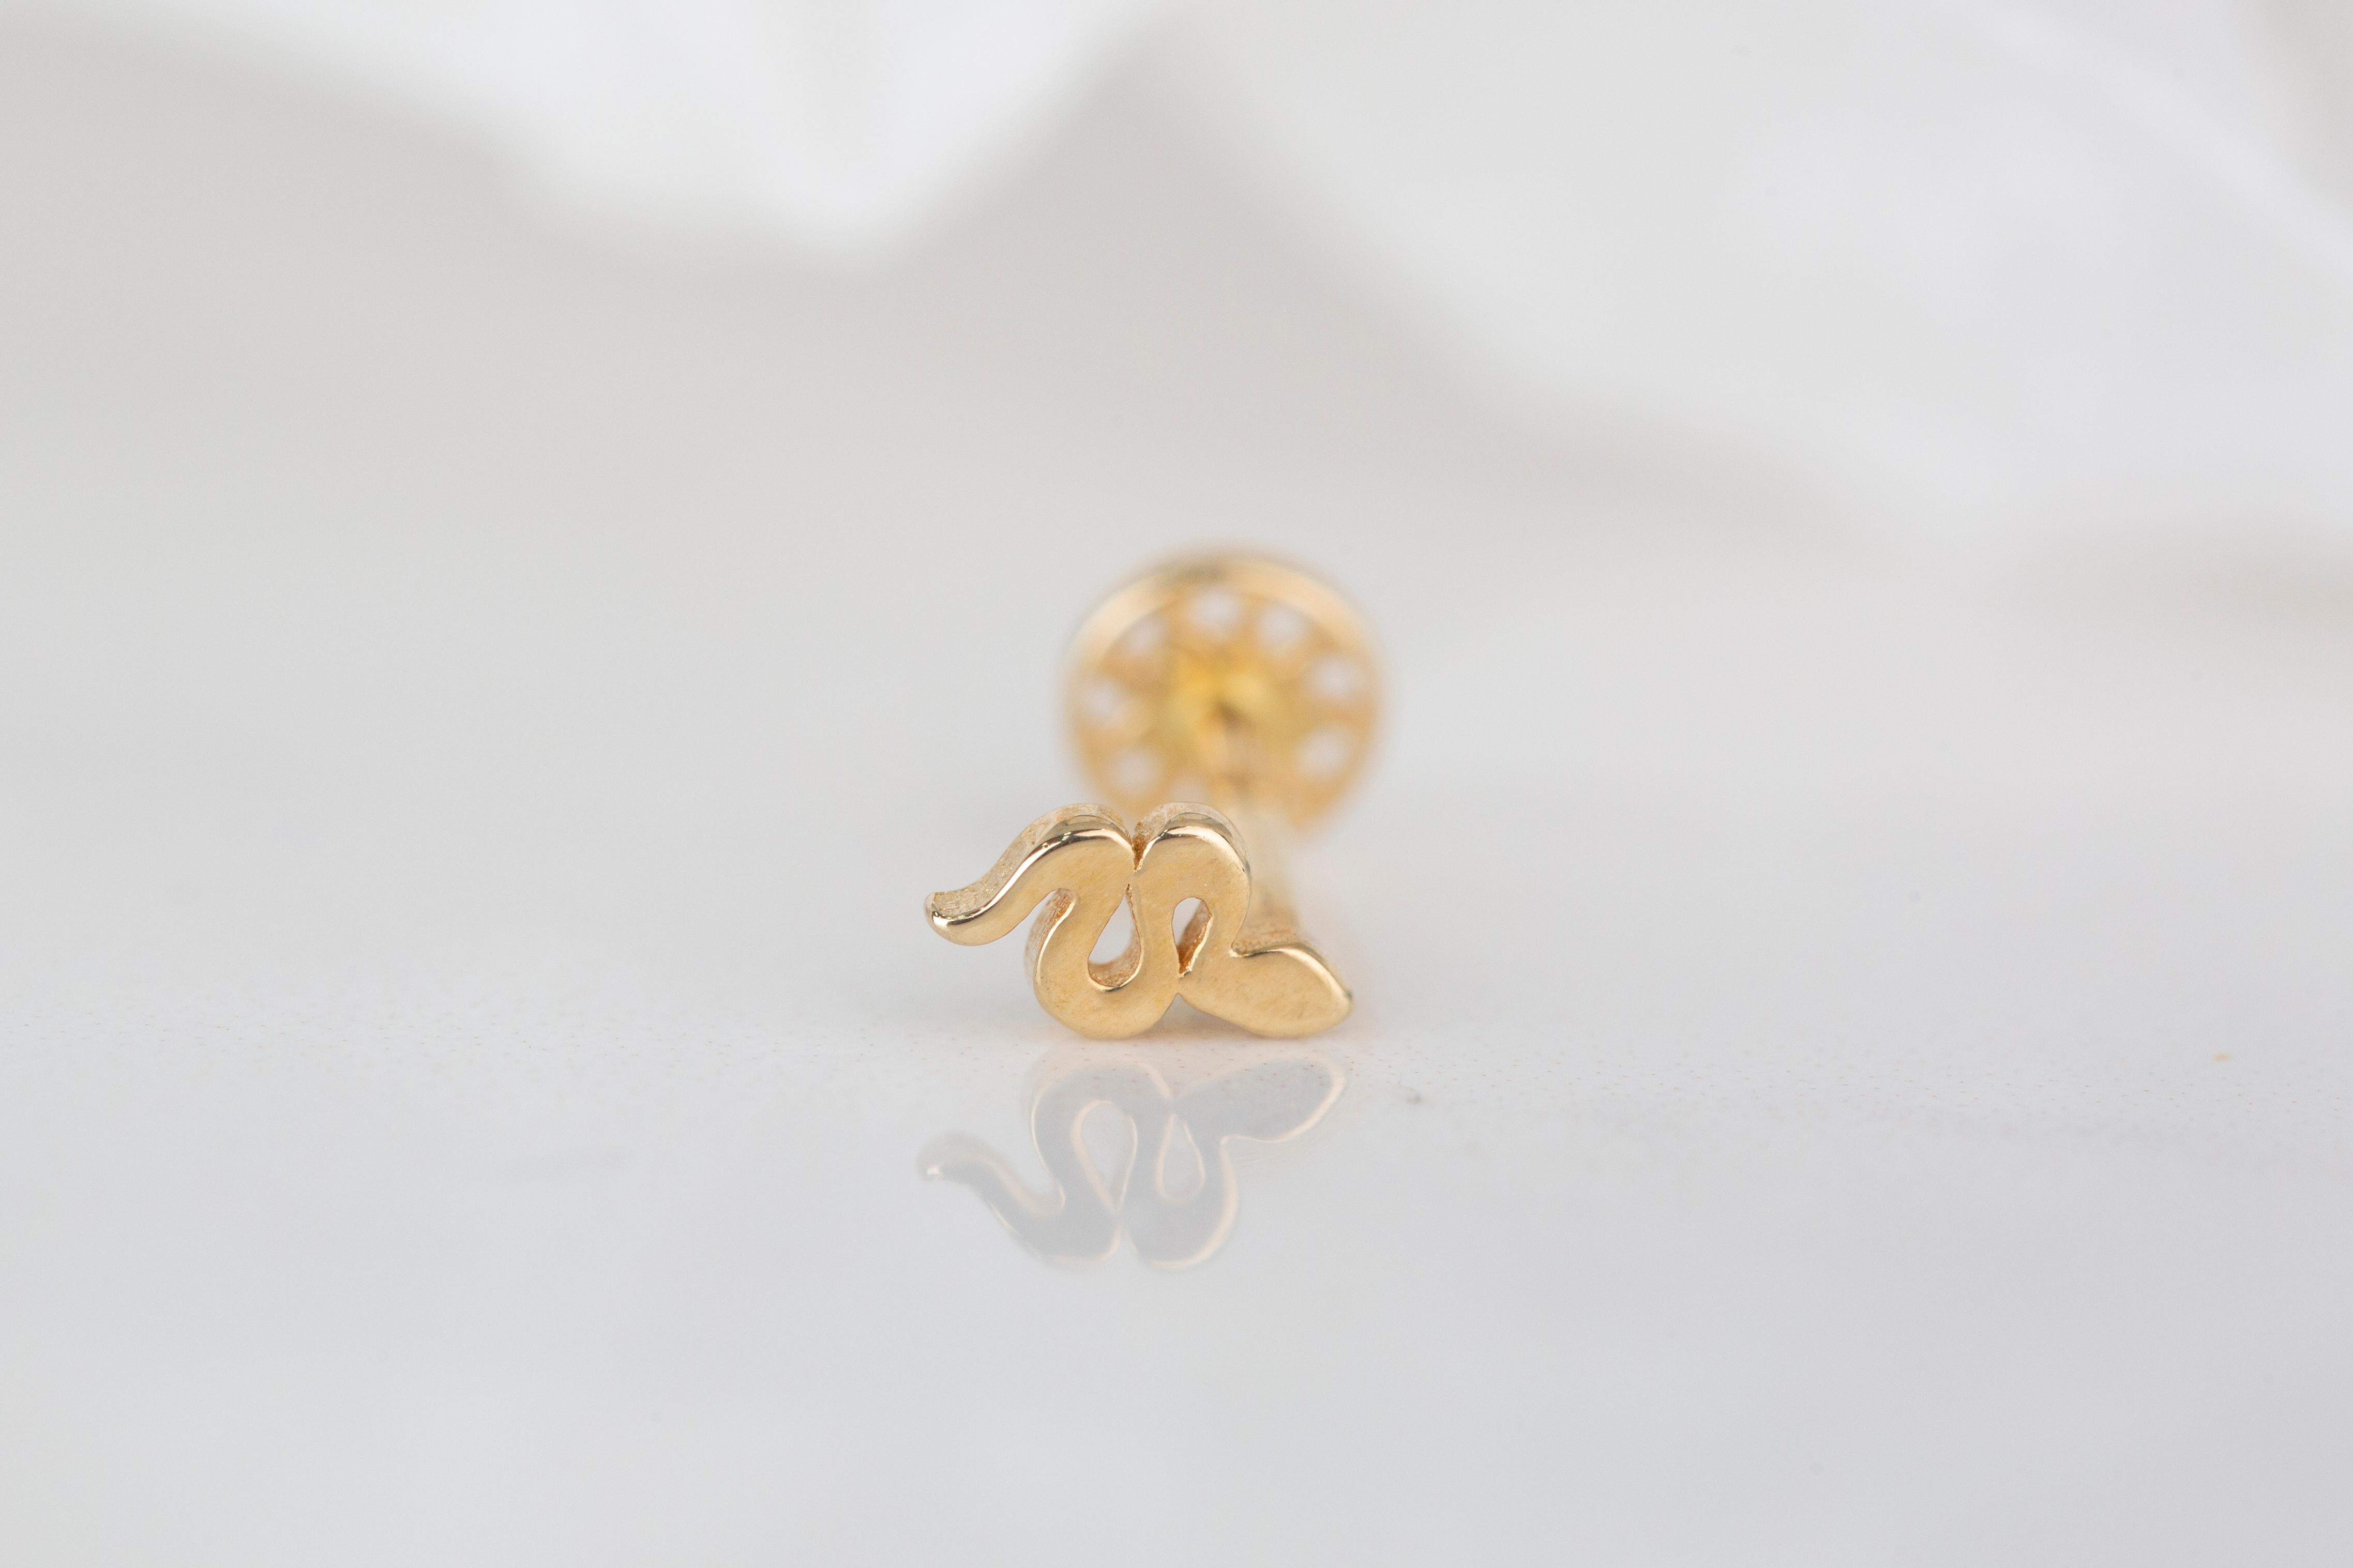 14K Gold Tiny Serpent Piercing, Small Snake Gold Stud Earring

You can use the piercing as an earring too! Also this piercing is suitable for tragus, nose, helix, lobe, flat, medusa, monreo, labret and stud.

This piercing was made with quality